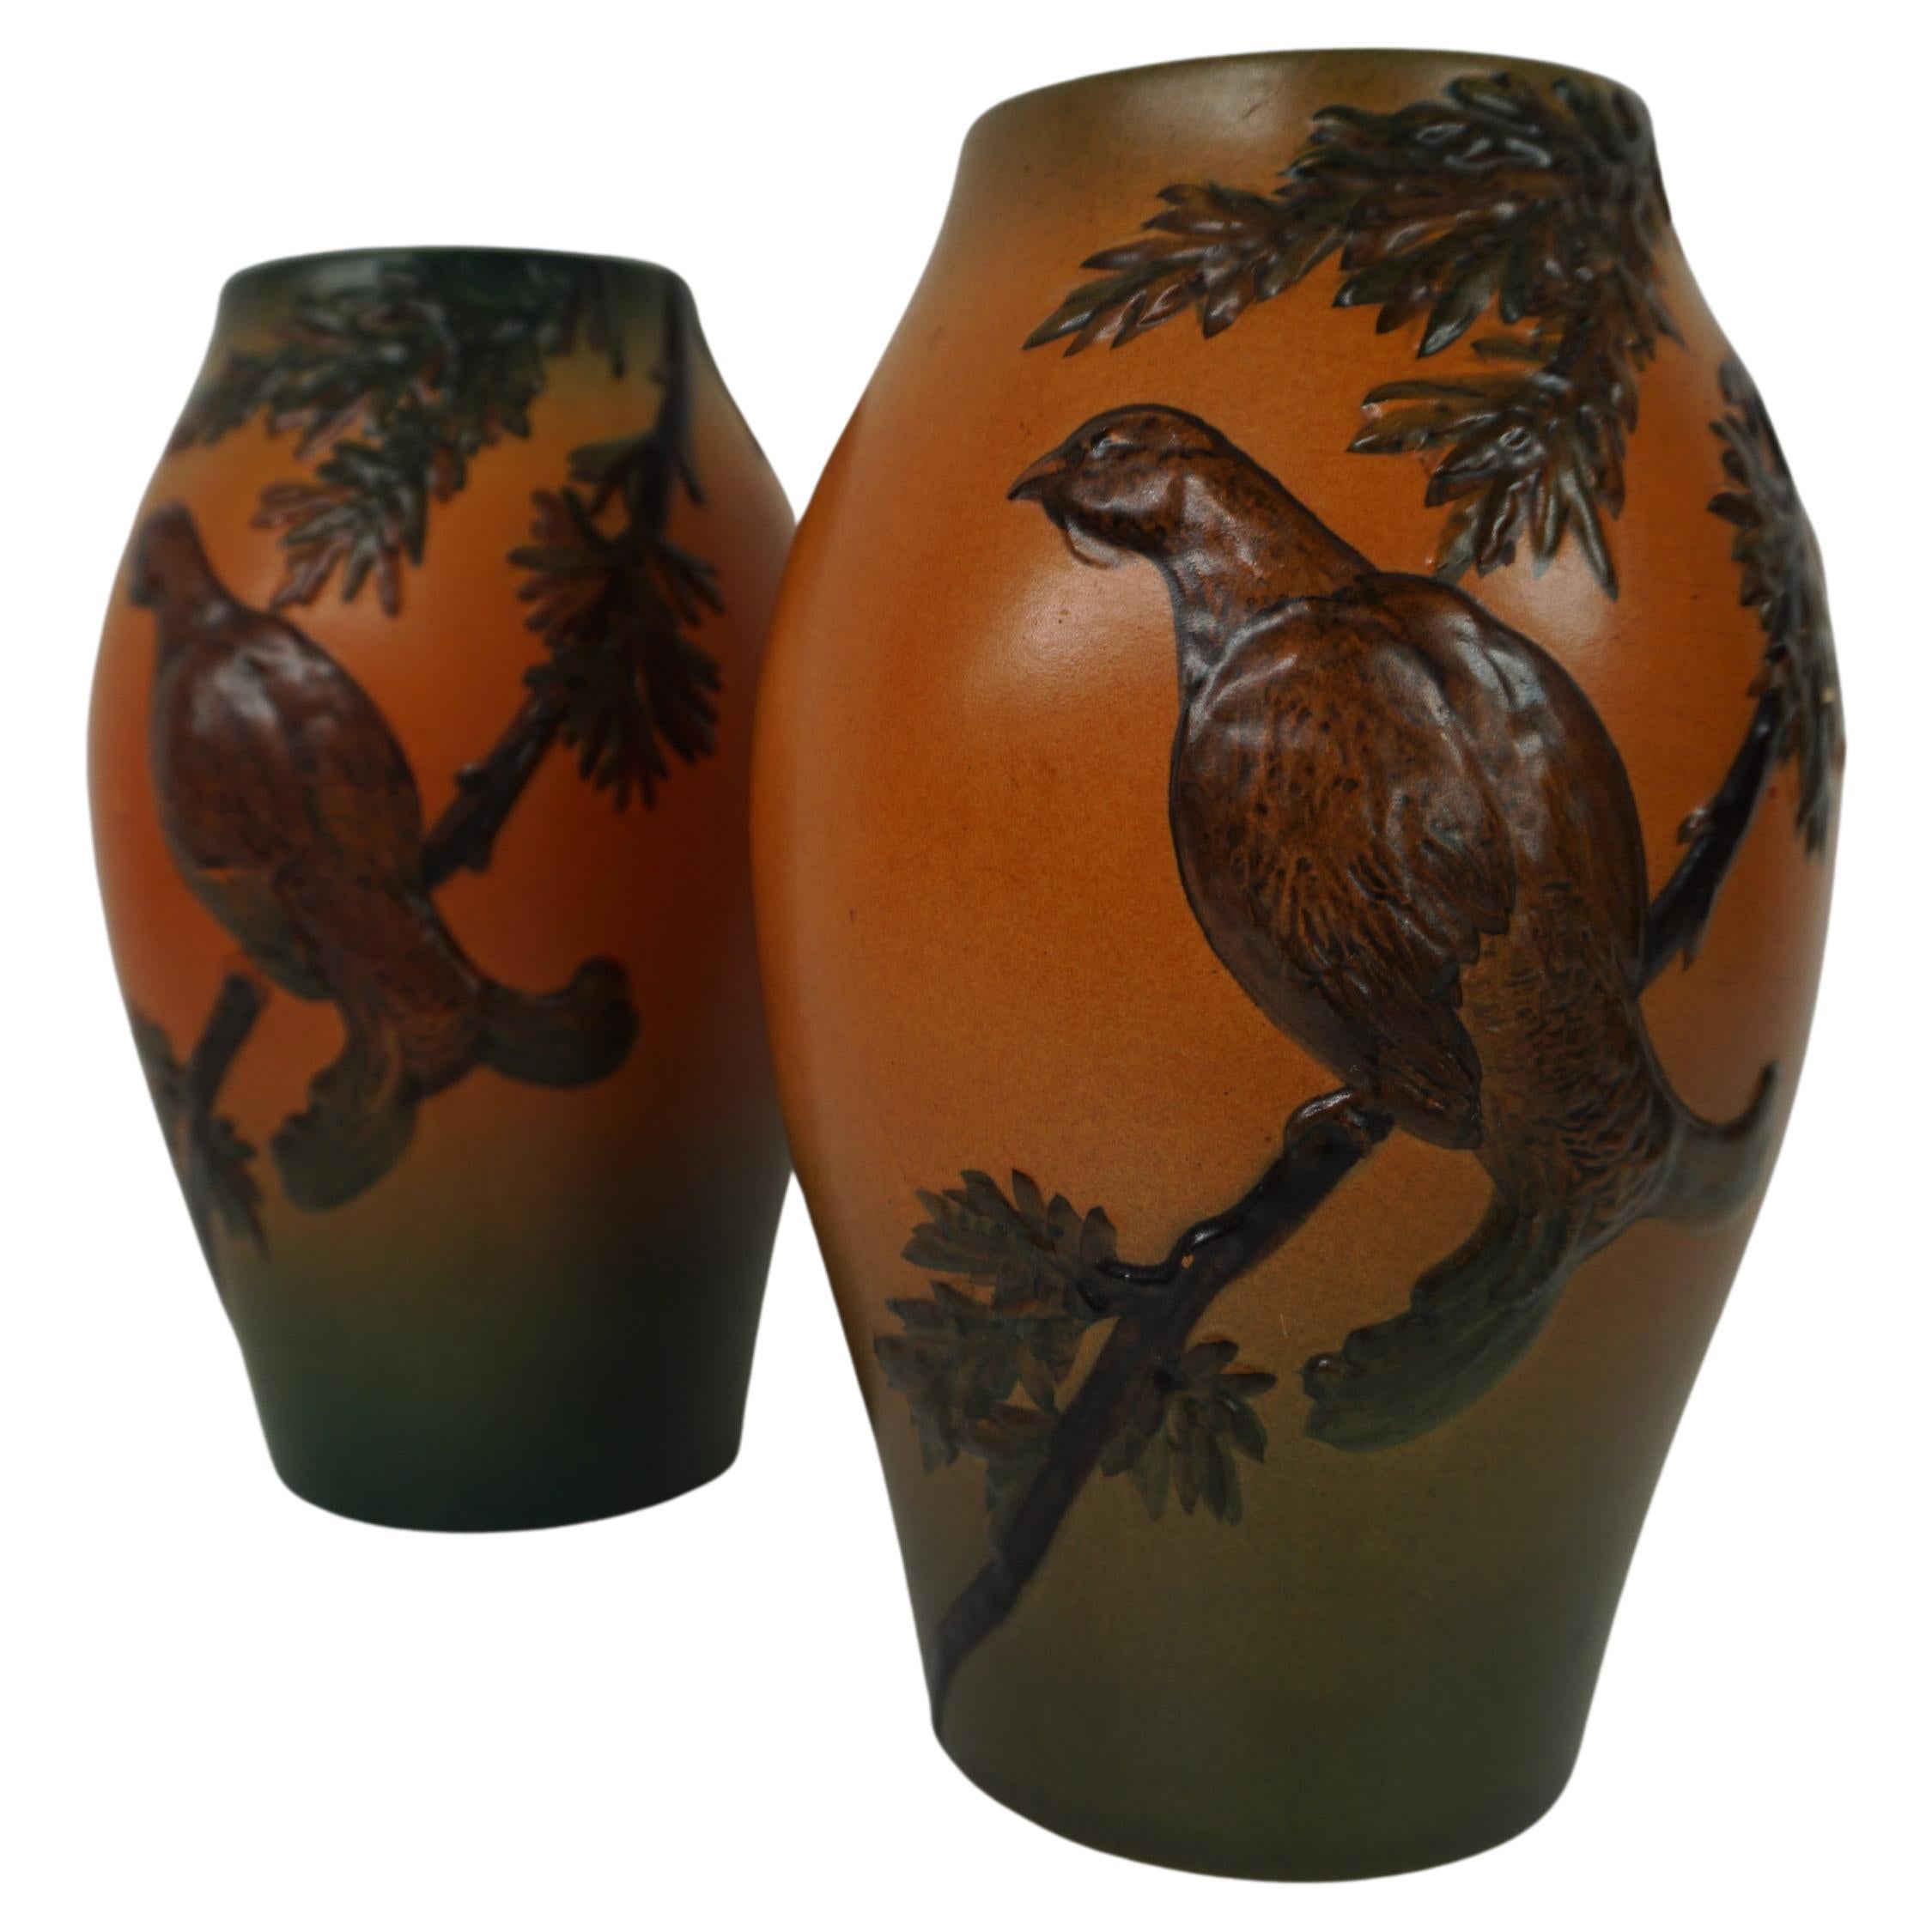 Handcrafted Danish Art Nouveau Black Grouse Decorated Vases by P. Ipsens Enke For Sale